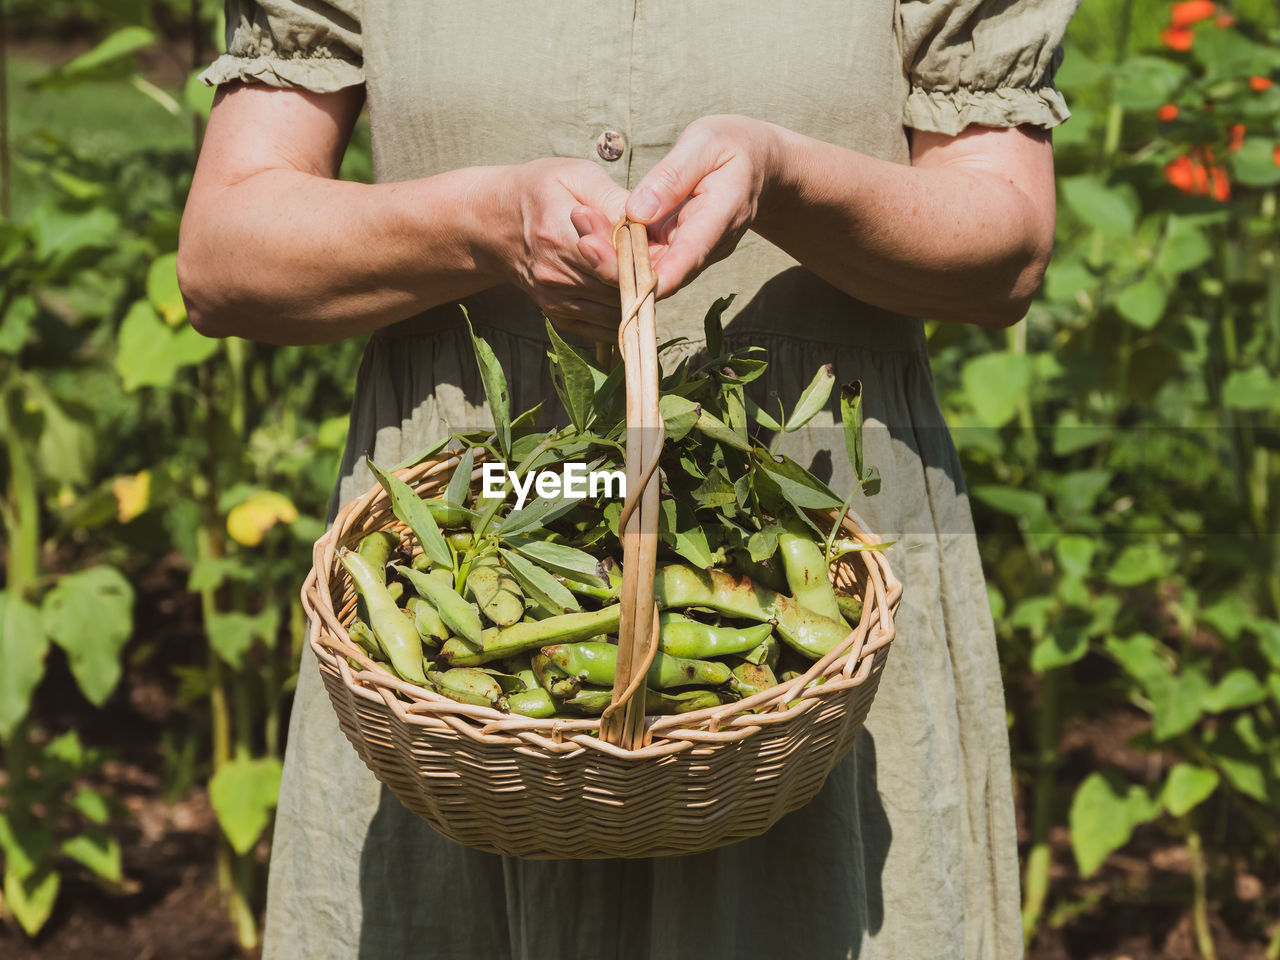 Woman is holding a basket with fava beans.